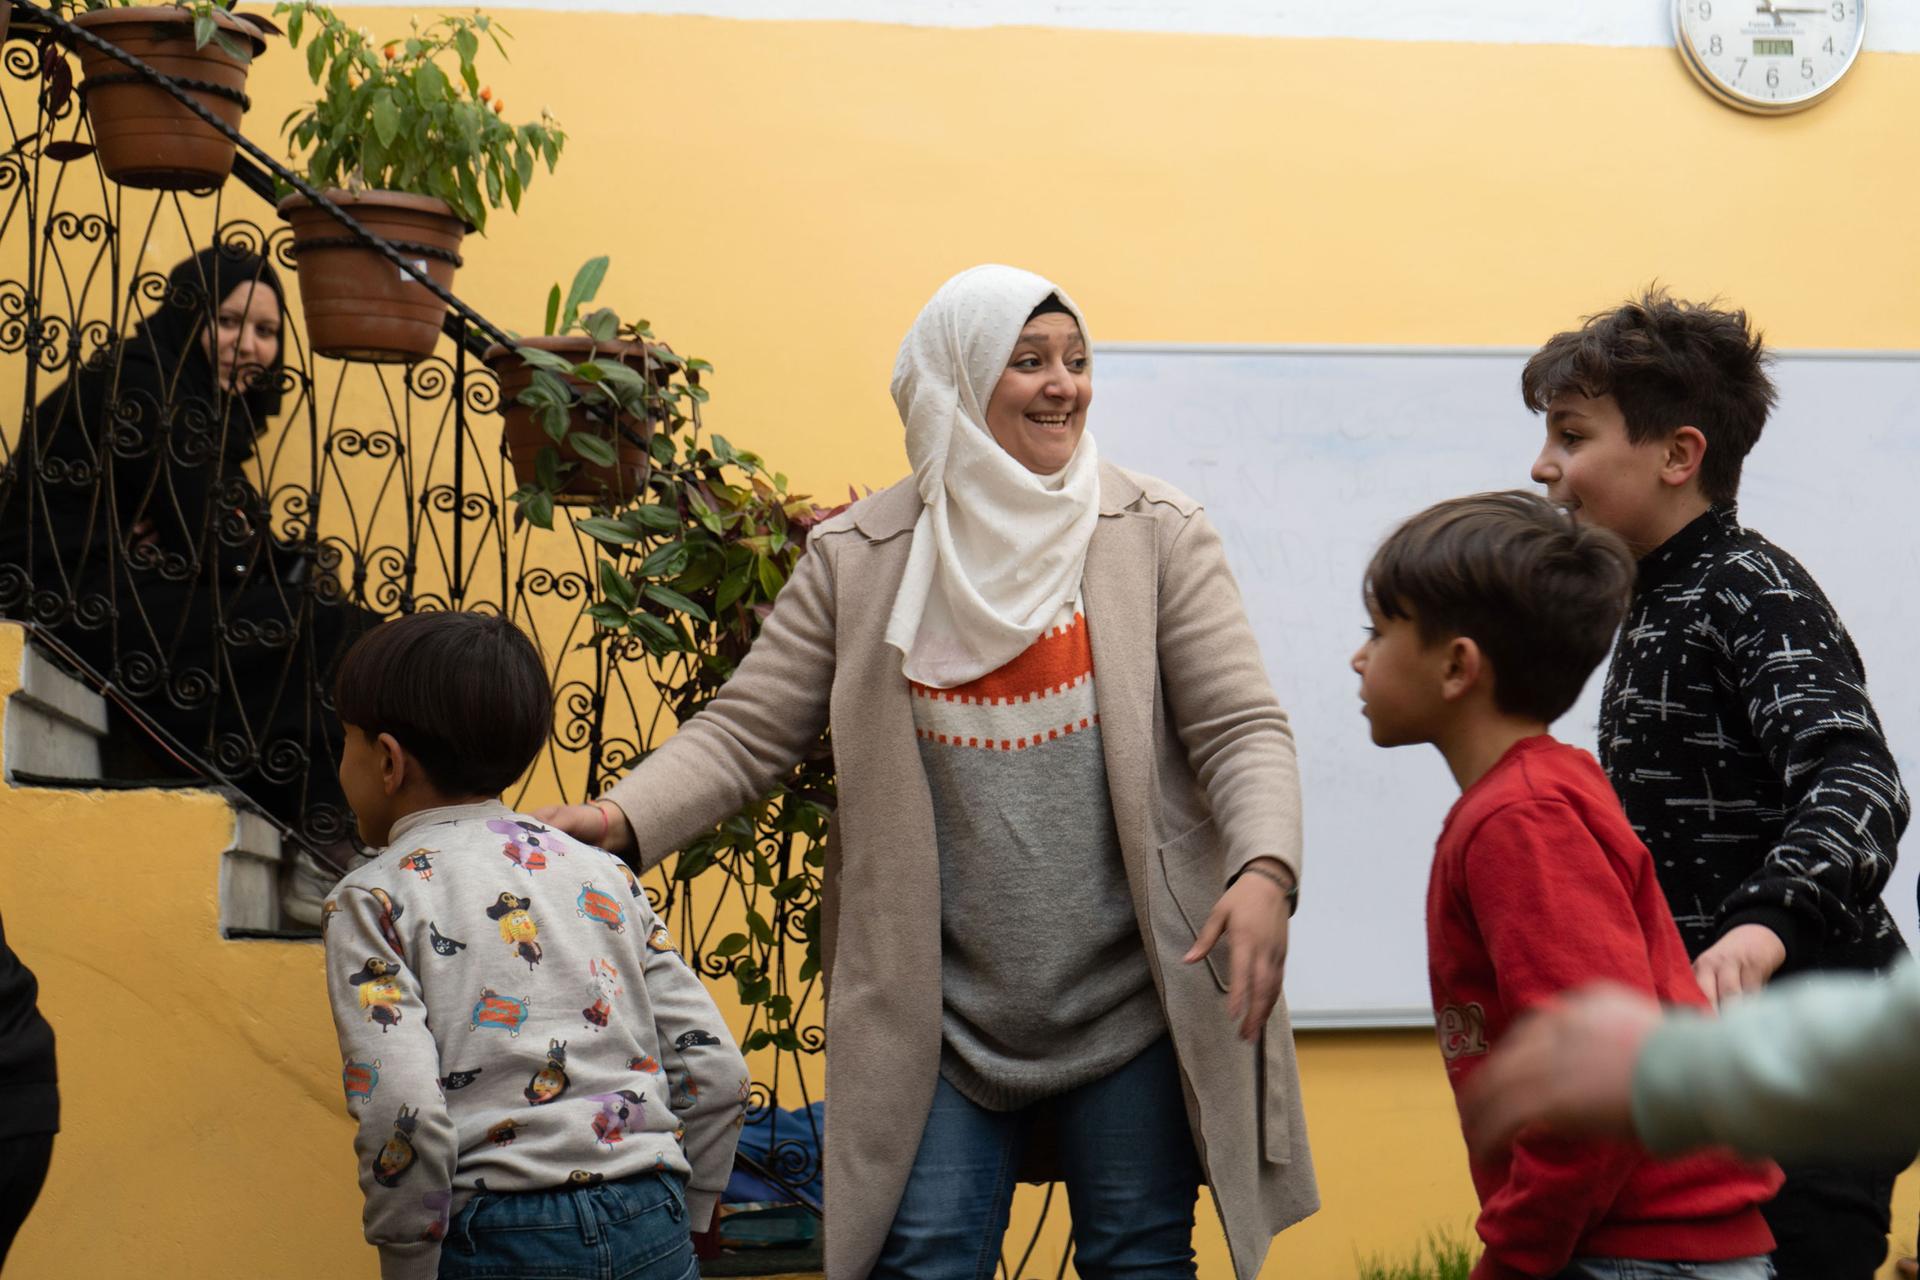 Hibah Jahjah interacts with children at Kids Rainbow, an alternative learning space.